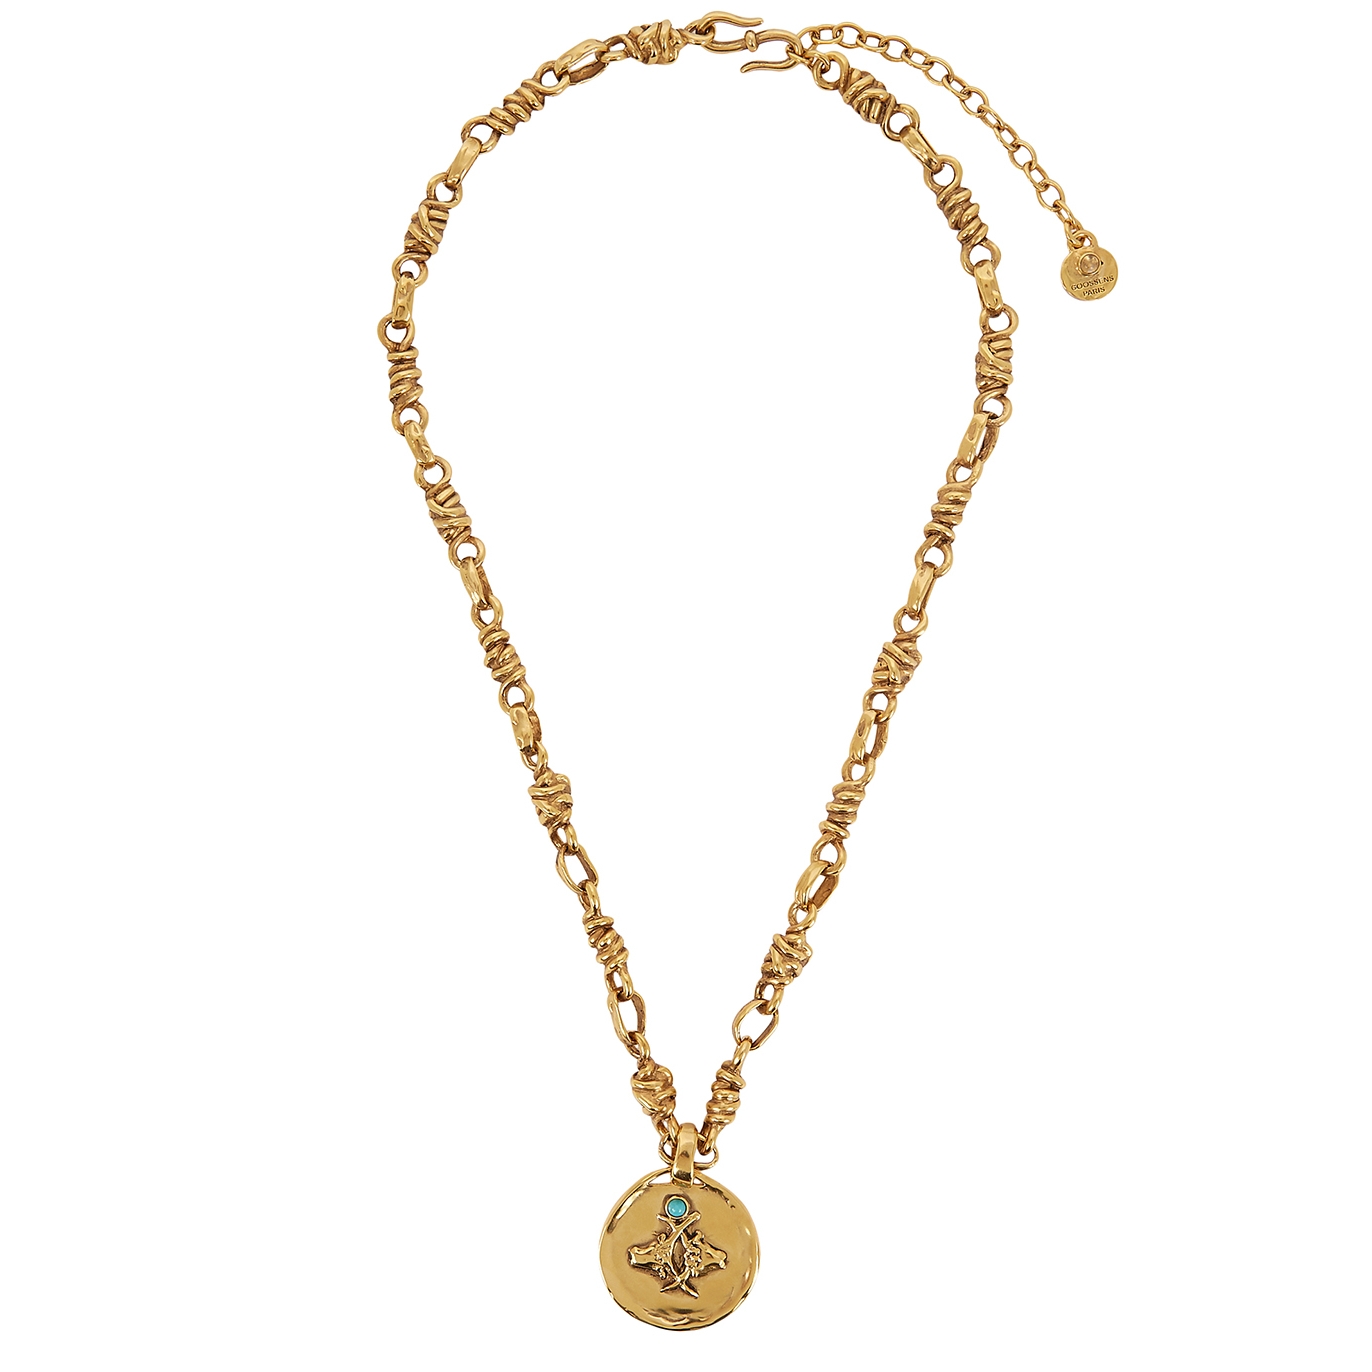 Goossens Talisman Taurus 24kt Gold-dipped Chain Necklace - One Size